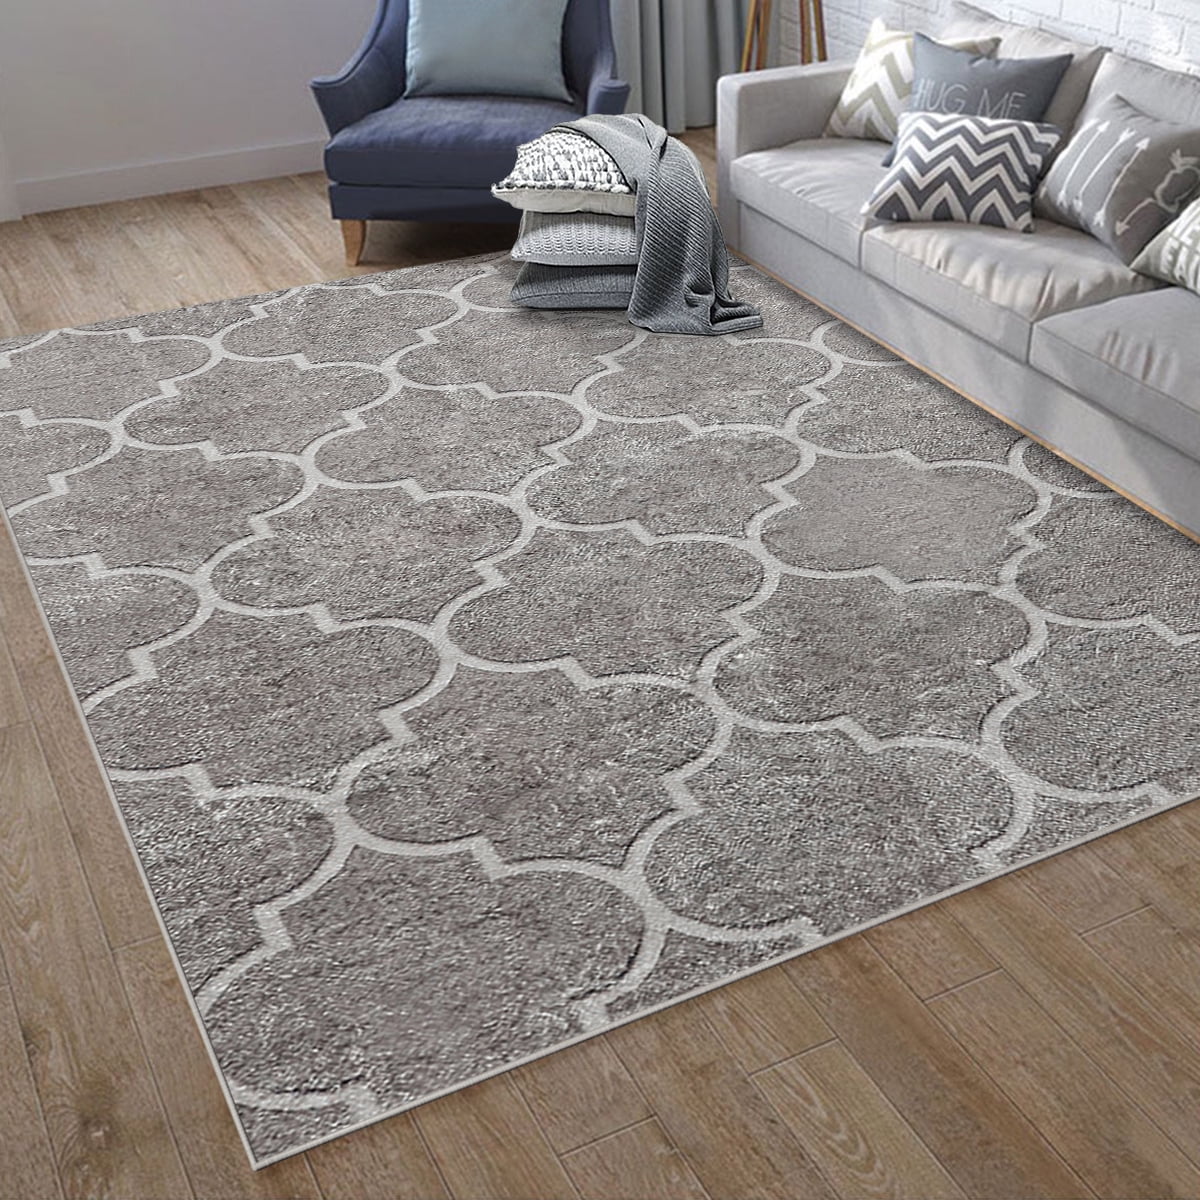 Snailhome Soft Large Area Rugs, Foldable Baby & Pet Friendly Non-Slip  Carpet Floor Mat Decor for Bedroom Living Room Indoor Home(Size: 4 x 5.9  ft, 5.2 x 7.5 ft, 6.6 x 9.5 ft) - Walmart.com